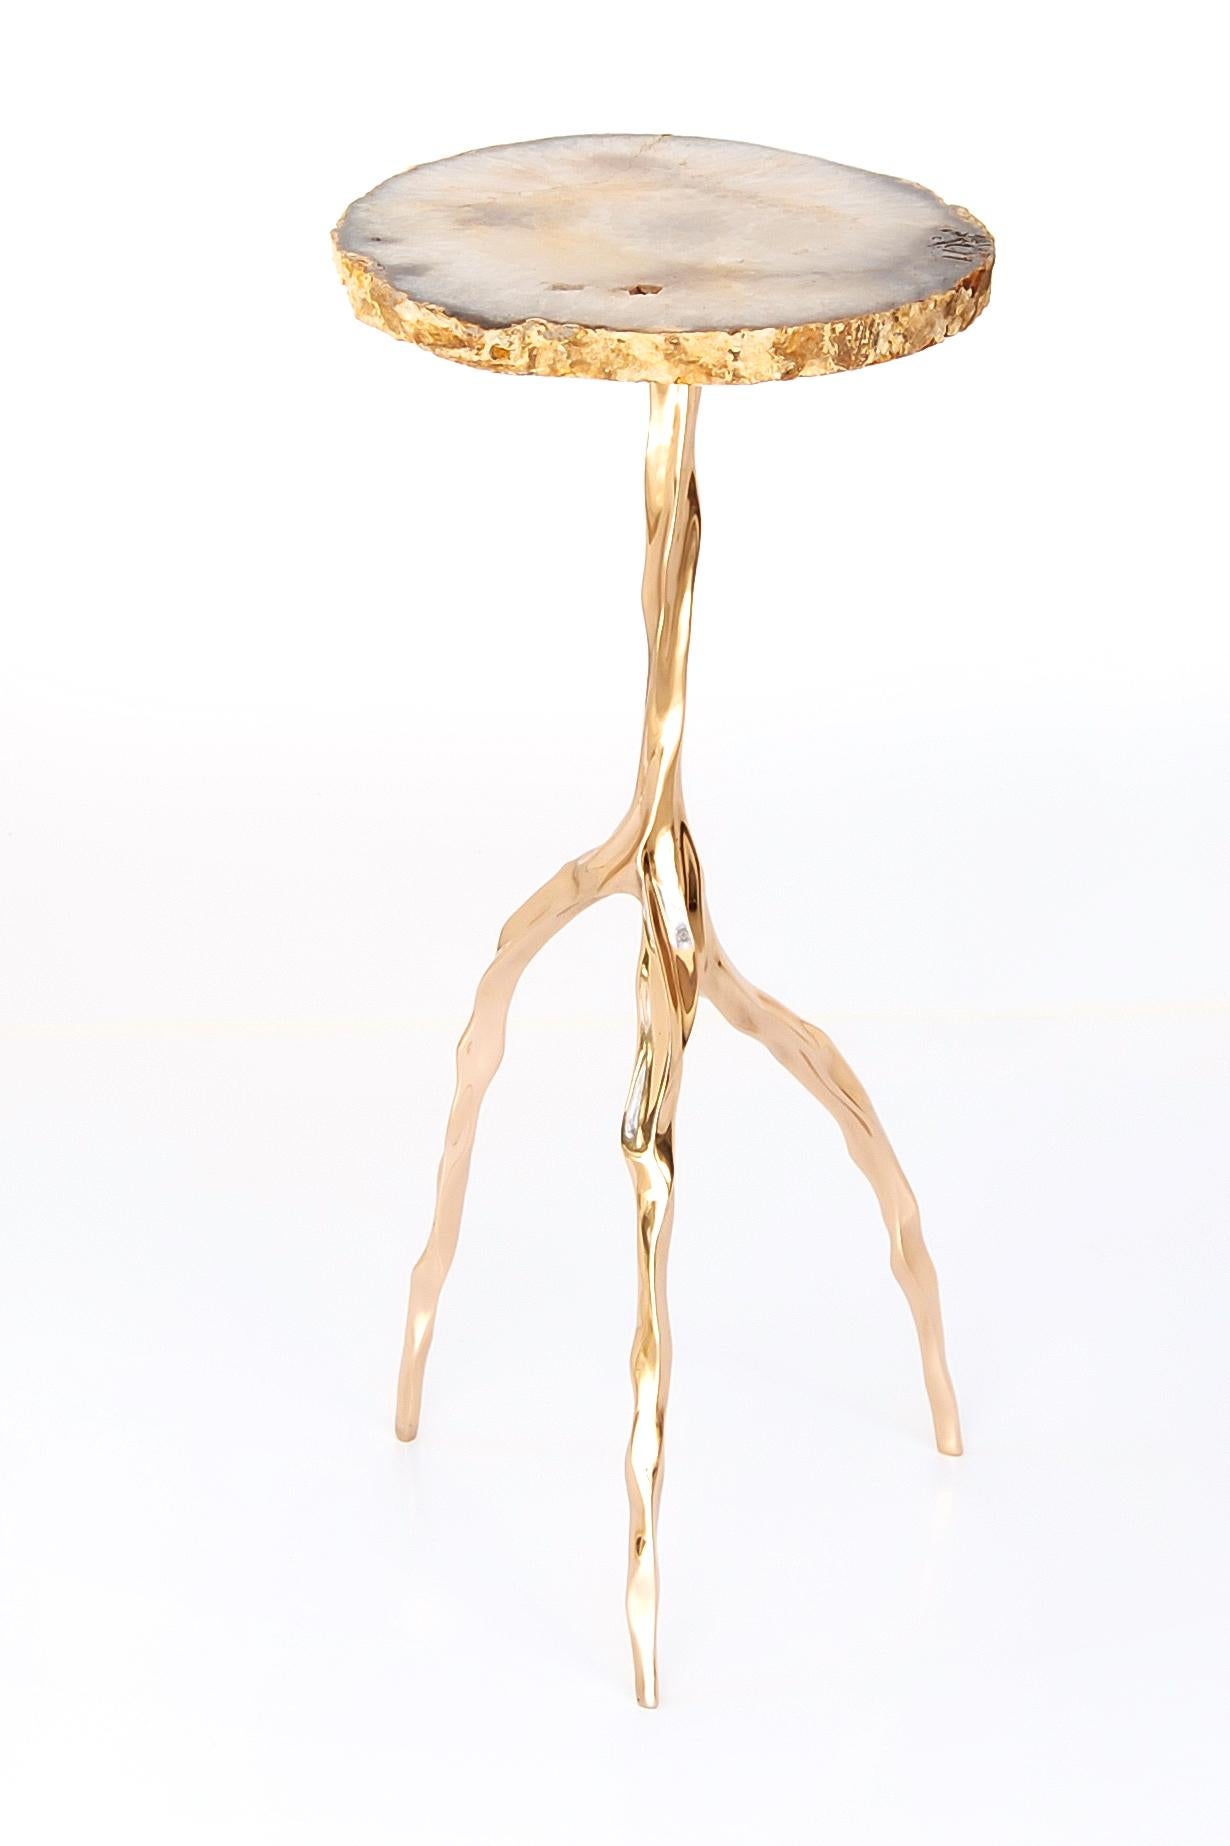 Nina drink table with Agate top by Fakasaka Design
Dimensions: W 30 cm, D 30 cm, H 62 cm.
Materials: polished bronze base, Agate top.
 
Also available in different table top materials:
Nero Marquina Marble 
Marrom Imperial Marble
Pedra